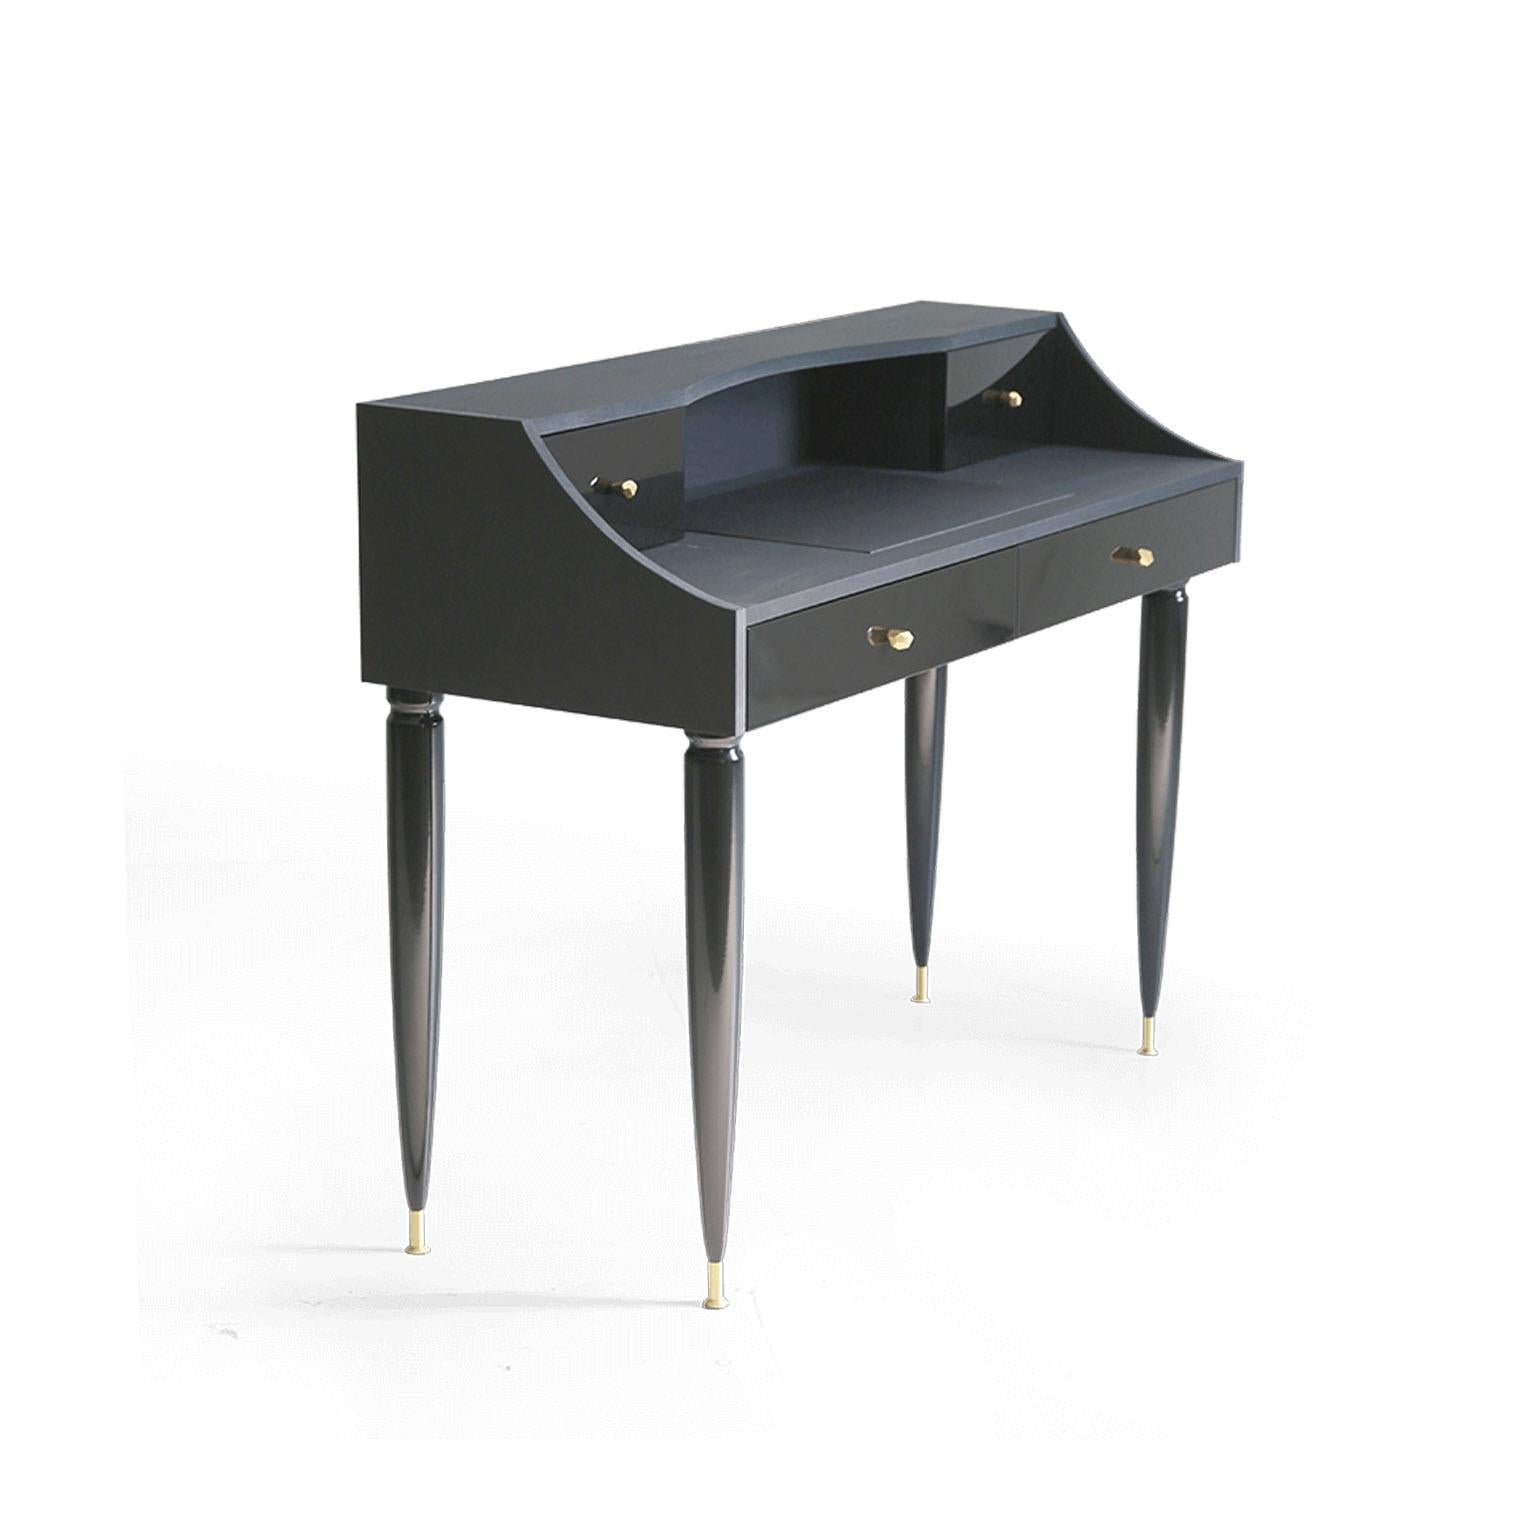 Refined elegance and classic design characterize the Kanttari Writing Desk. The definition of rich furniture design, this beautiful writing desk is handmade with soft to touch black panels and leather top. Luxurious brass accents on handles and legs